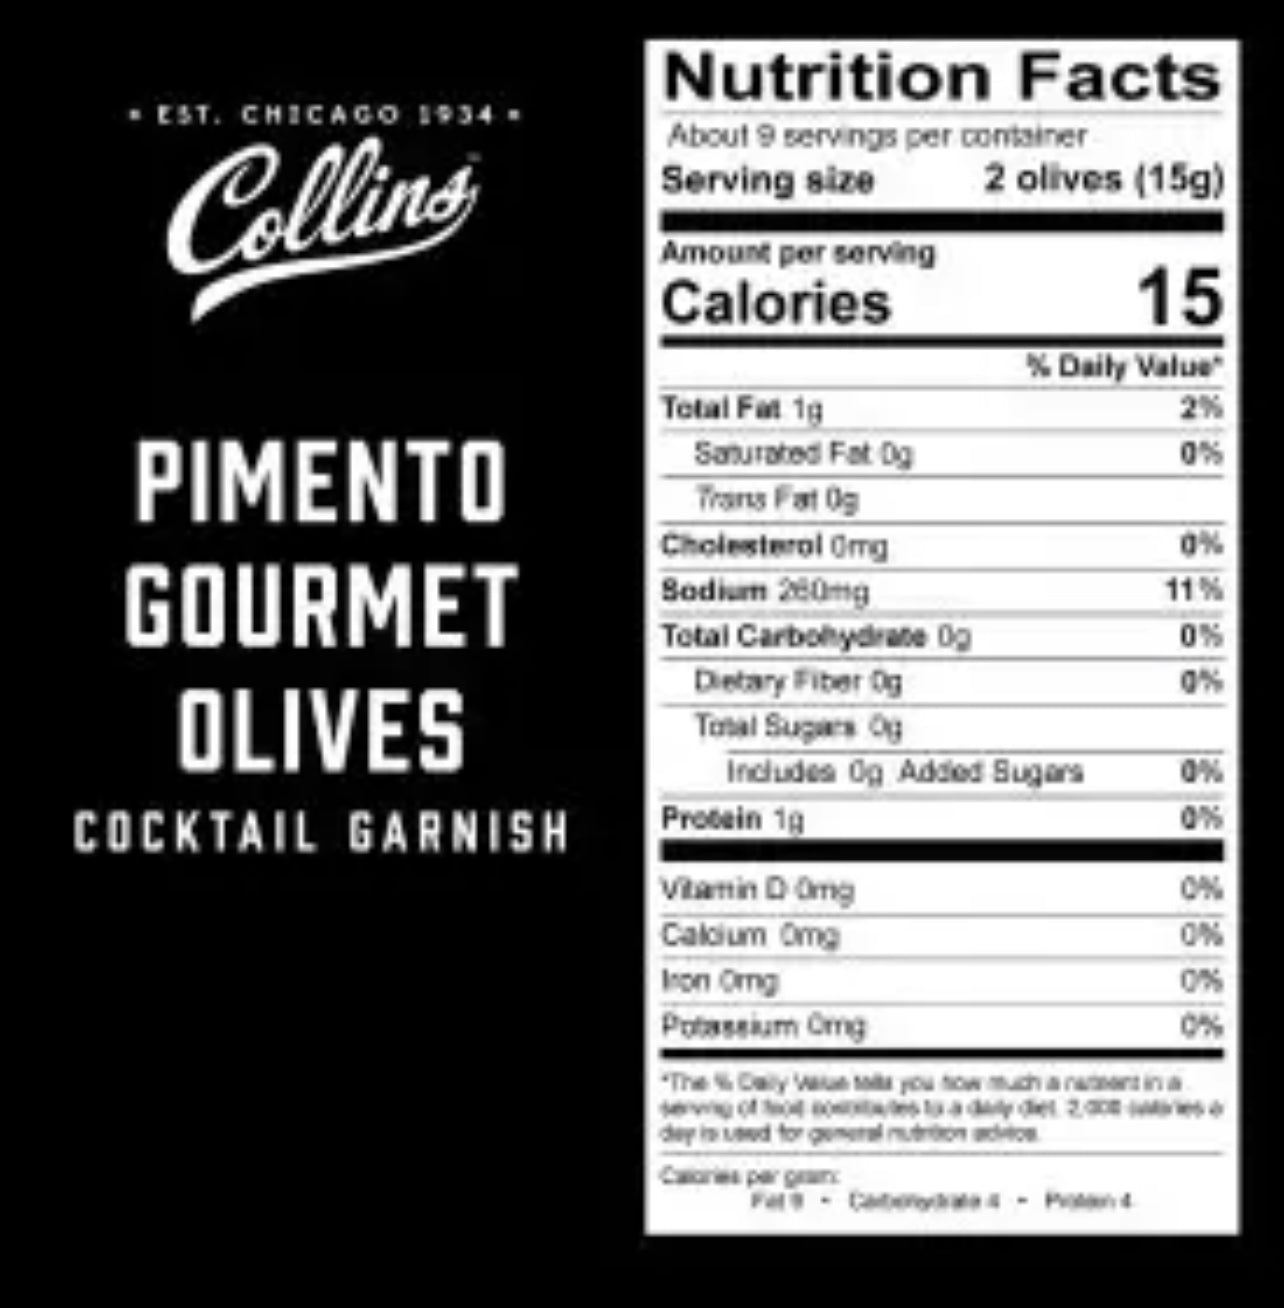 nutritional information for the jar of pimento gourmet spanish olives by Collins